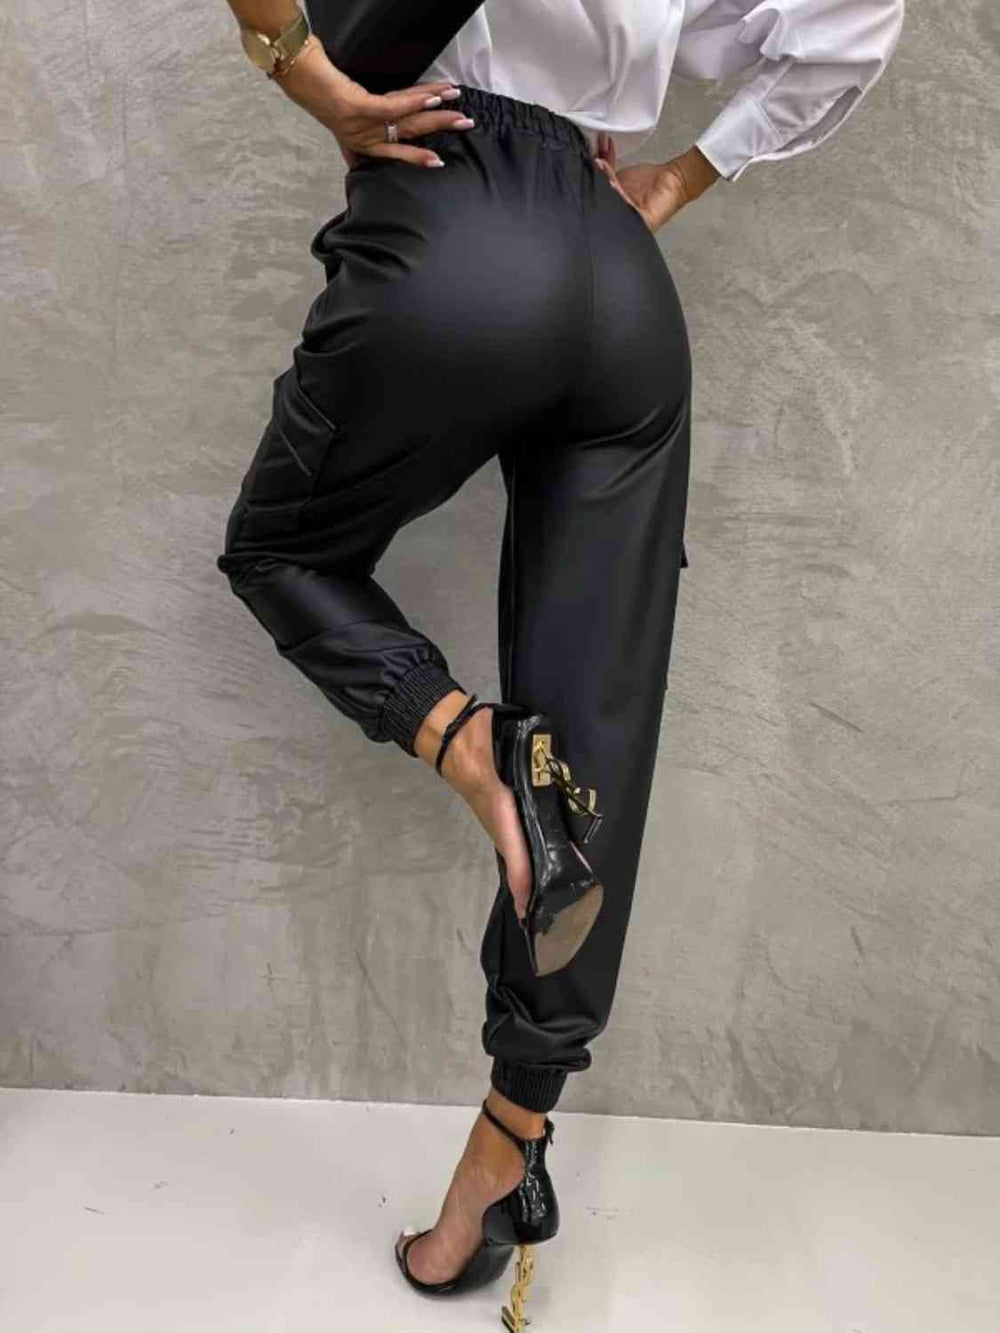 Backstage Pants - Cheeky Chic Boutique